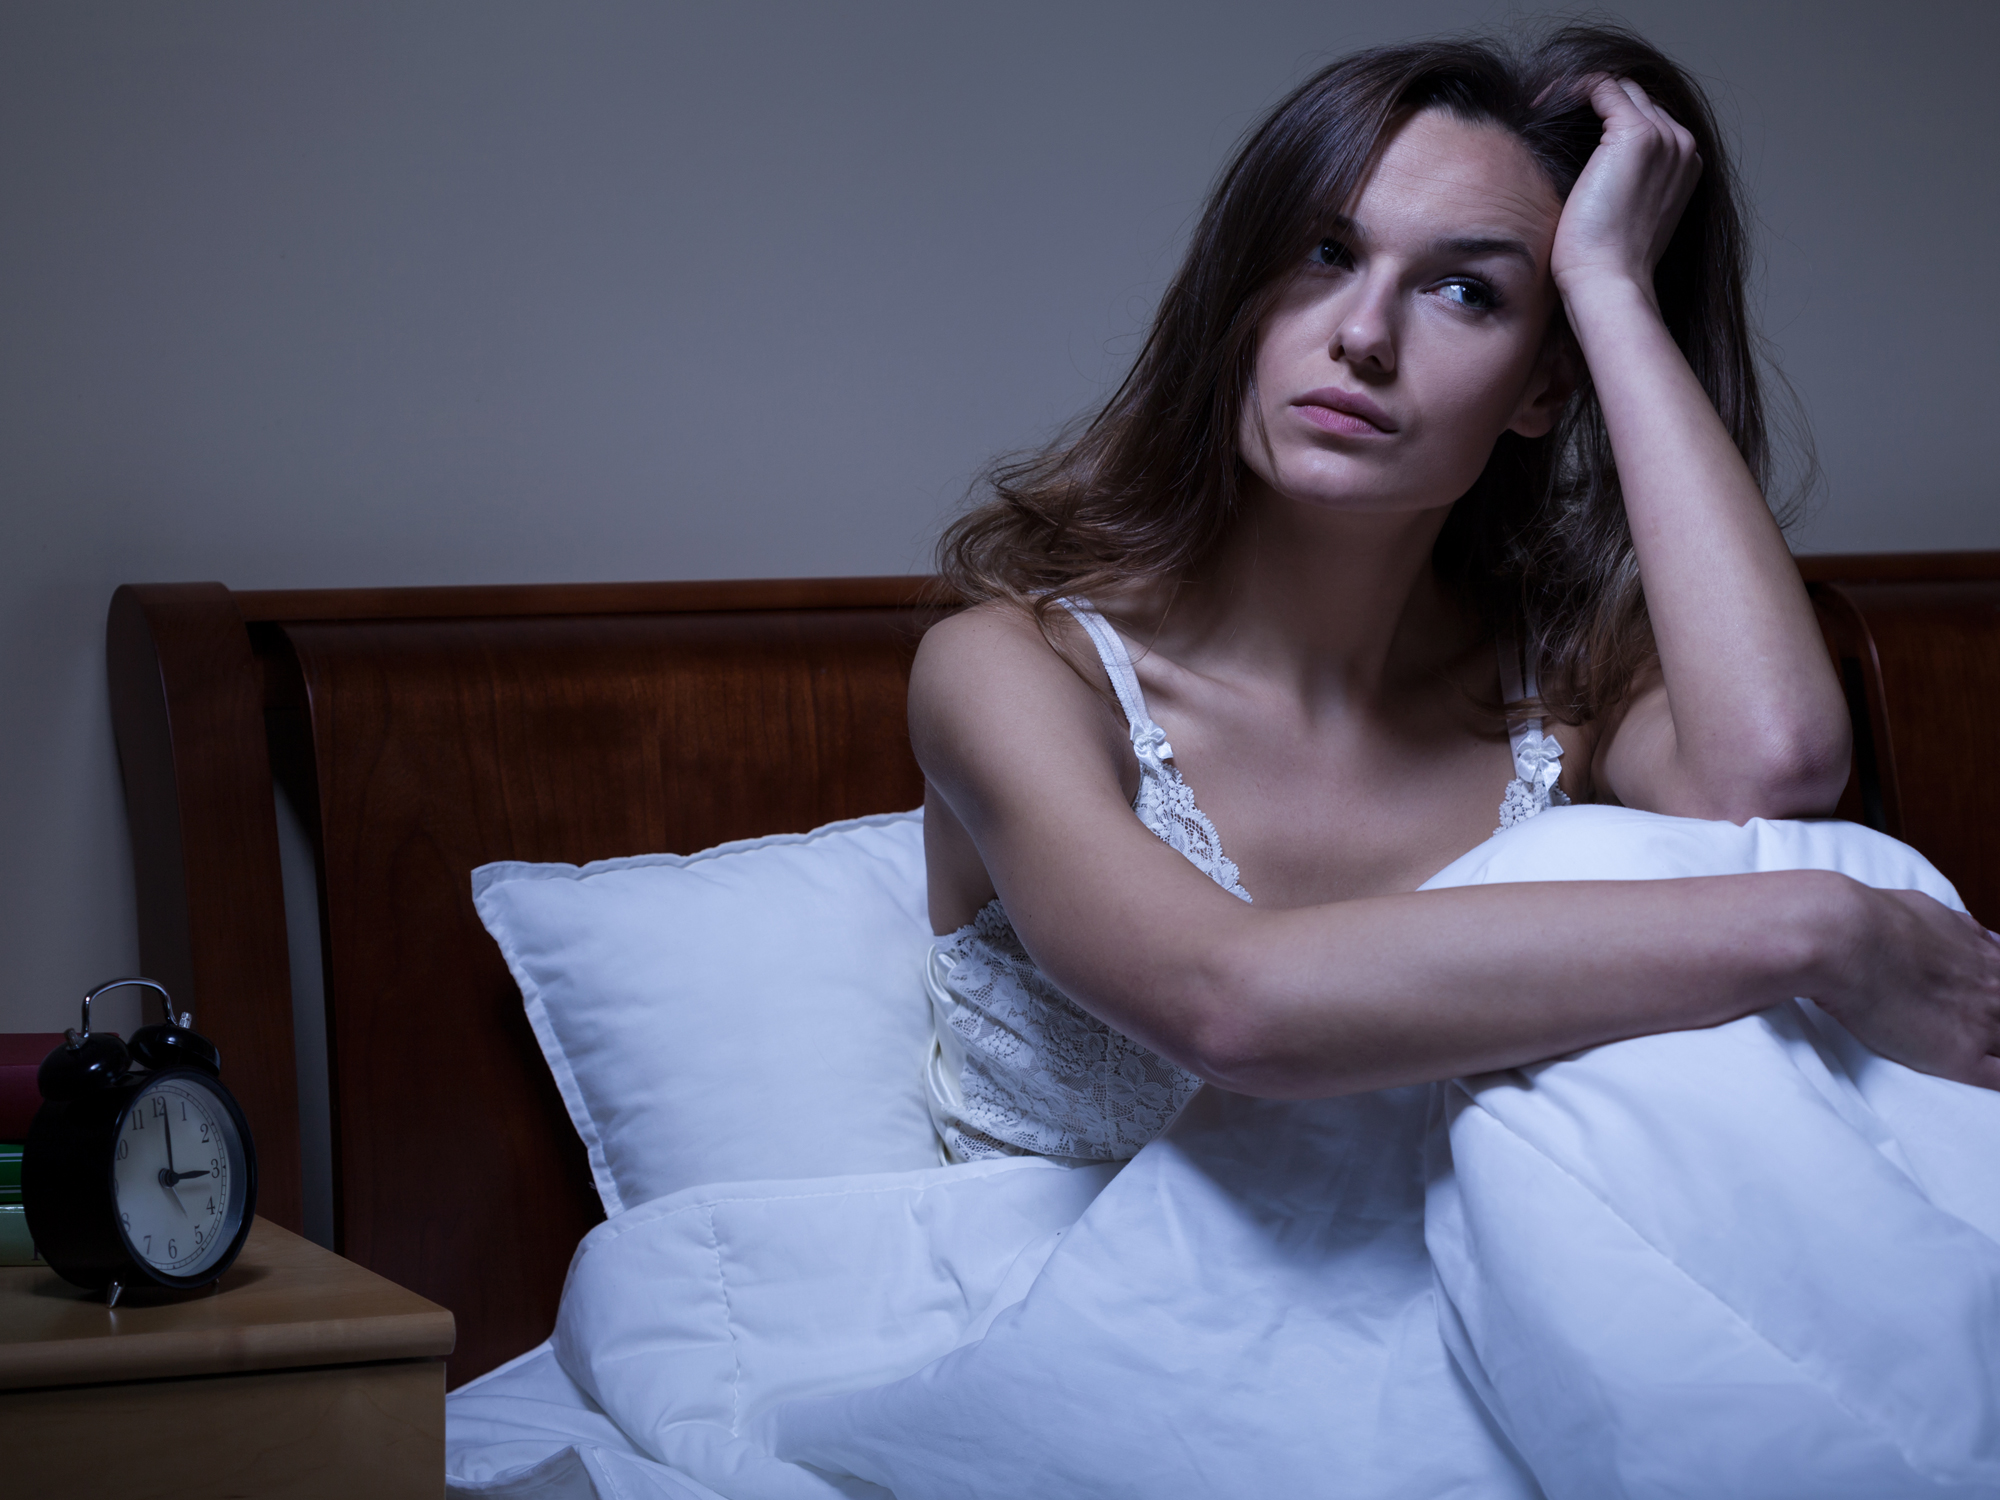 Can a lack of sleep give you cancer?